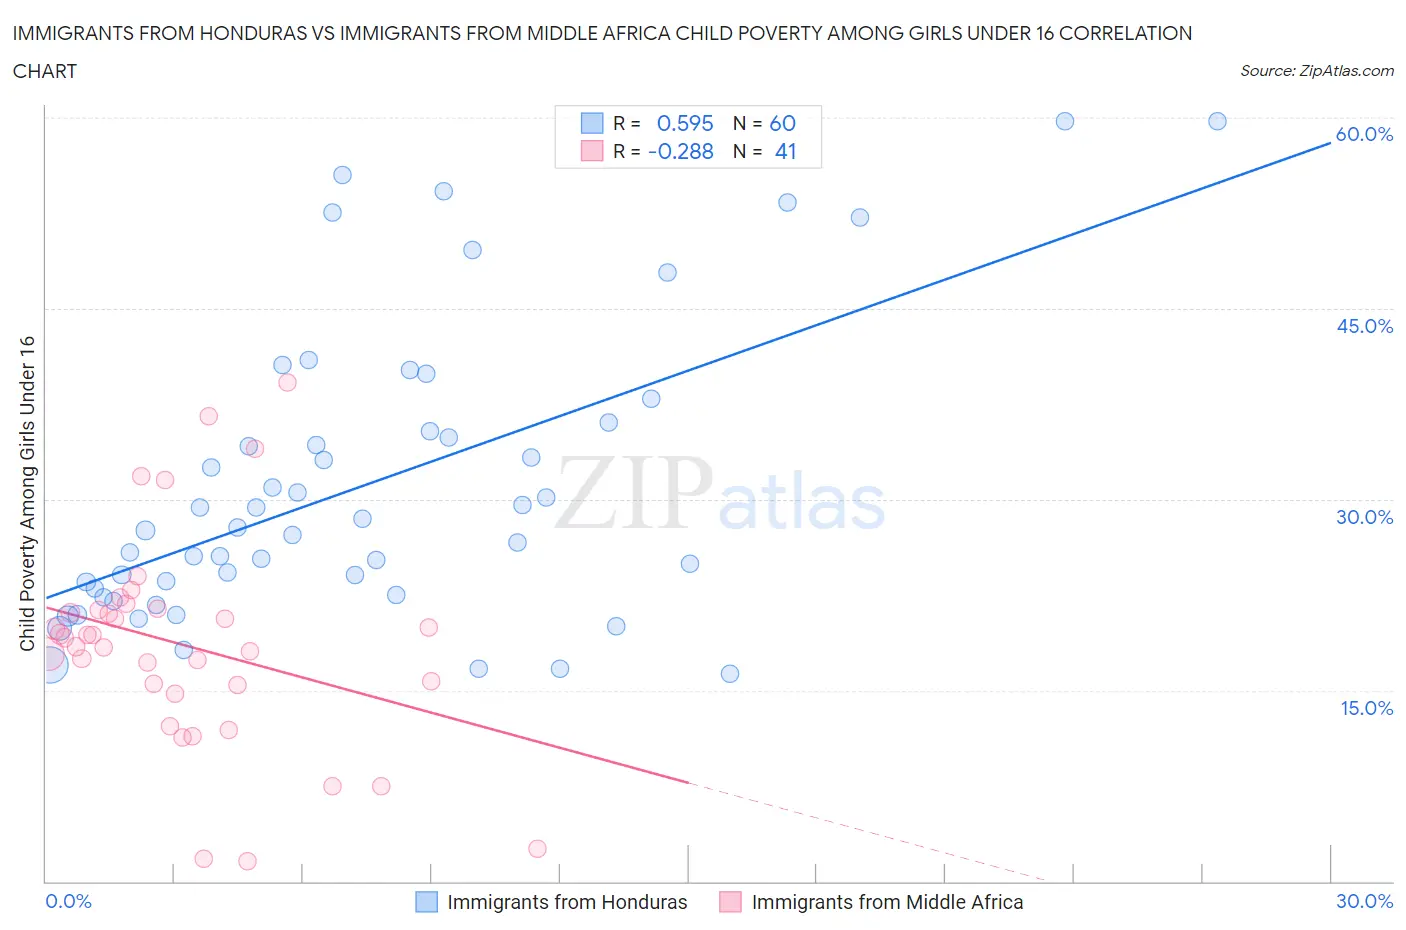 Immigrants from Honduras vs Immigrants from Middle Africa Child Poverty Among Girls Under 16